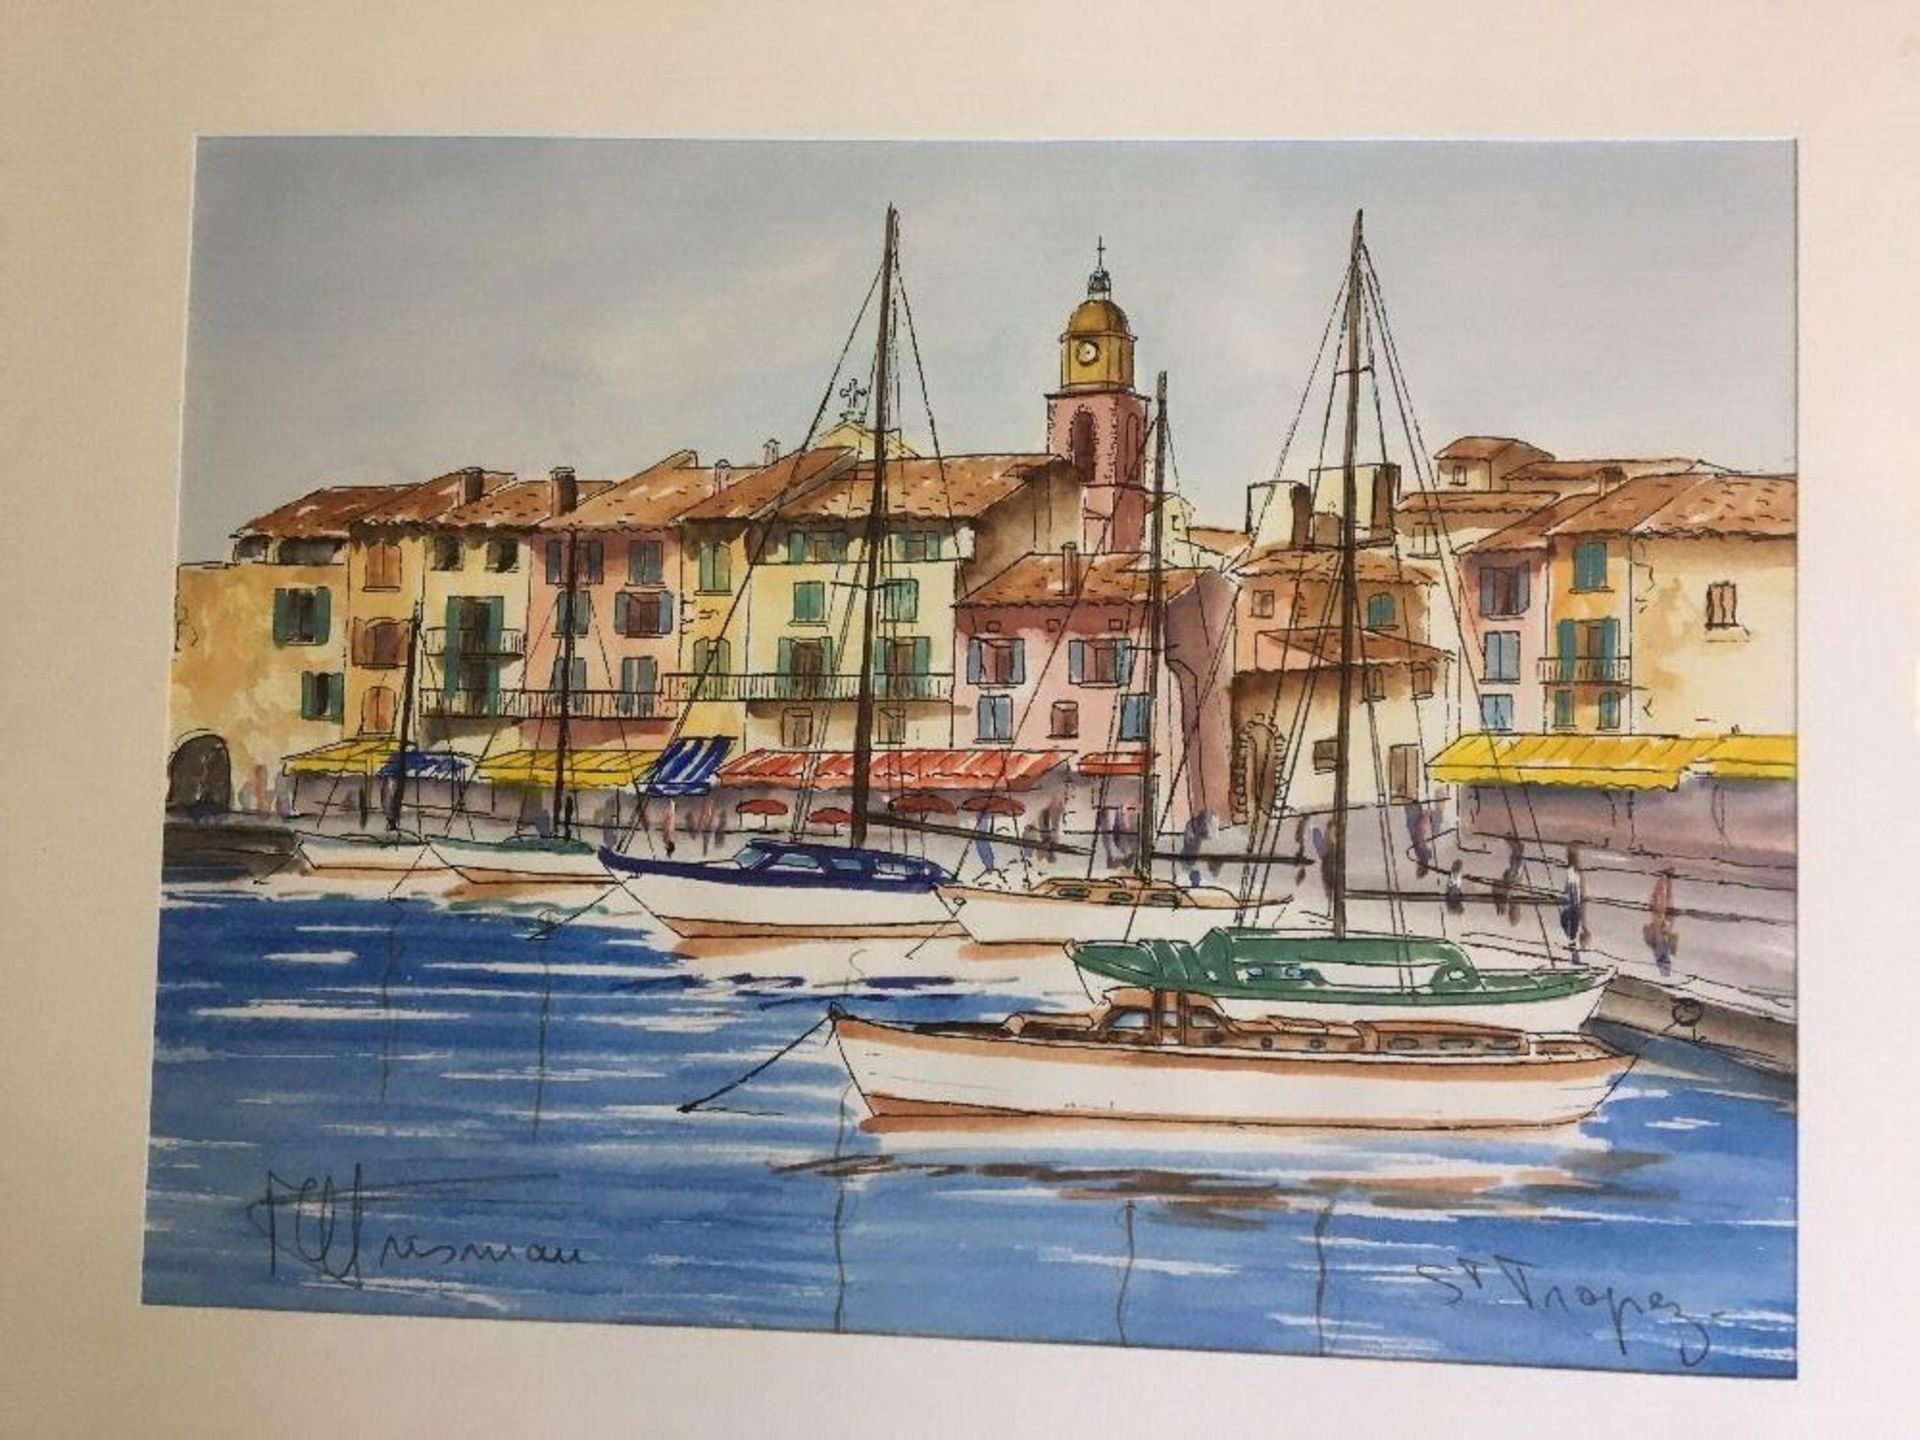 Painting Signed by French Artist Chrismau "ST. TROPEZ" with Authenticity Certificate. Ink &